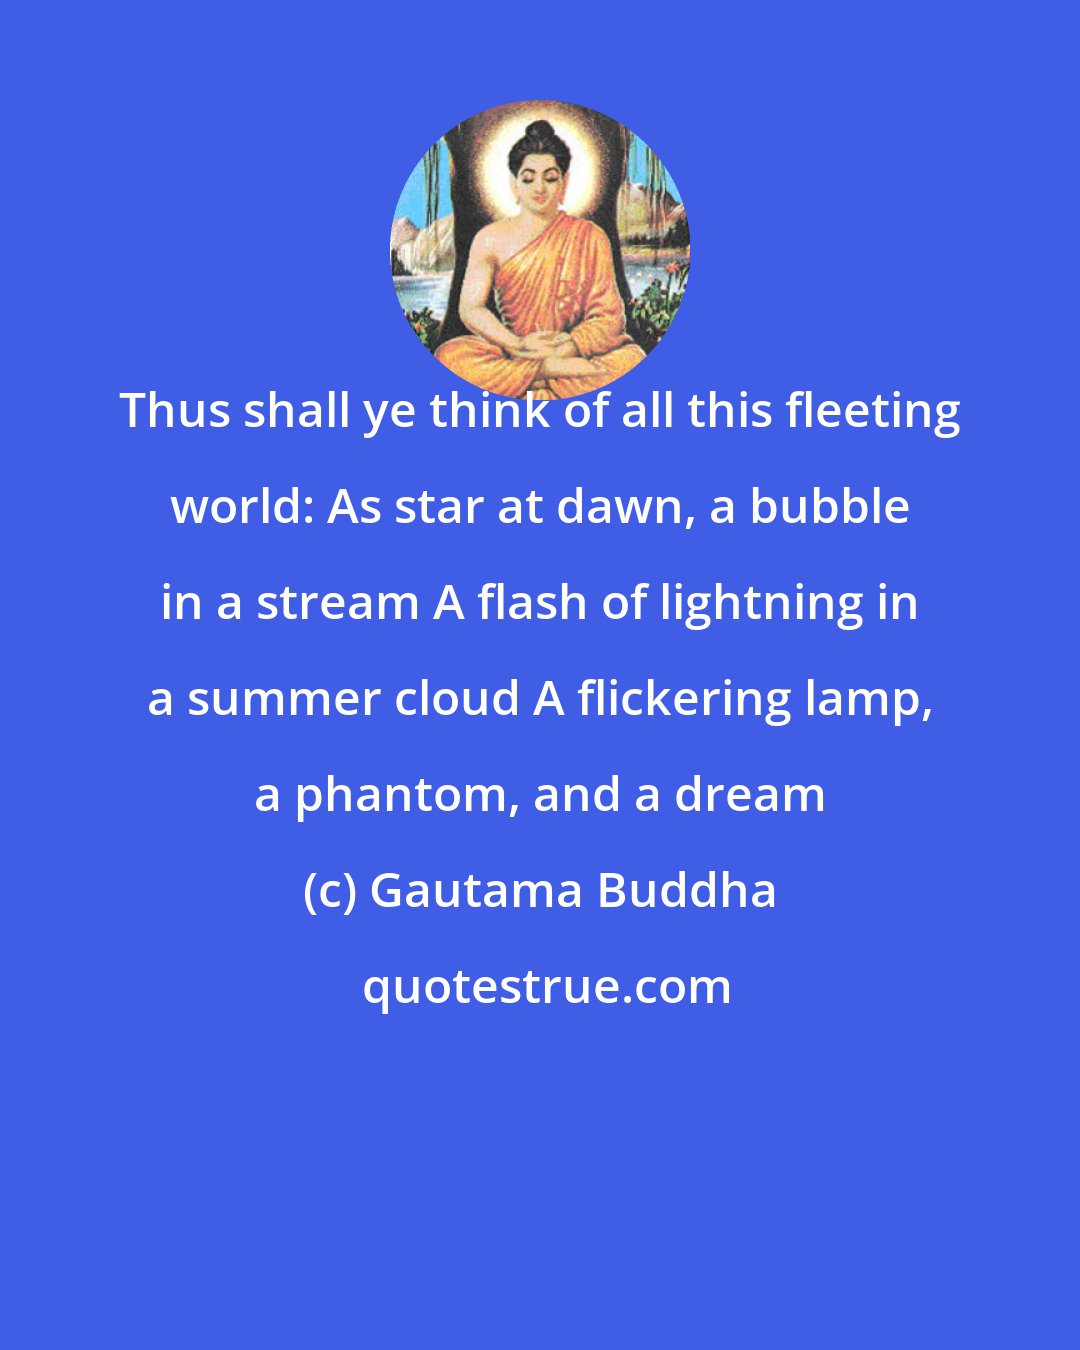 Gautama Buddha: Thus shall ye think of all this fleeting world: As star at dawn, a bubble in a stream A flash of lightning in a summer cloud A flickering lamp, a phantom, and a dream